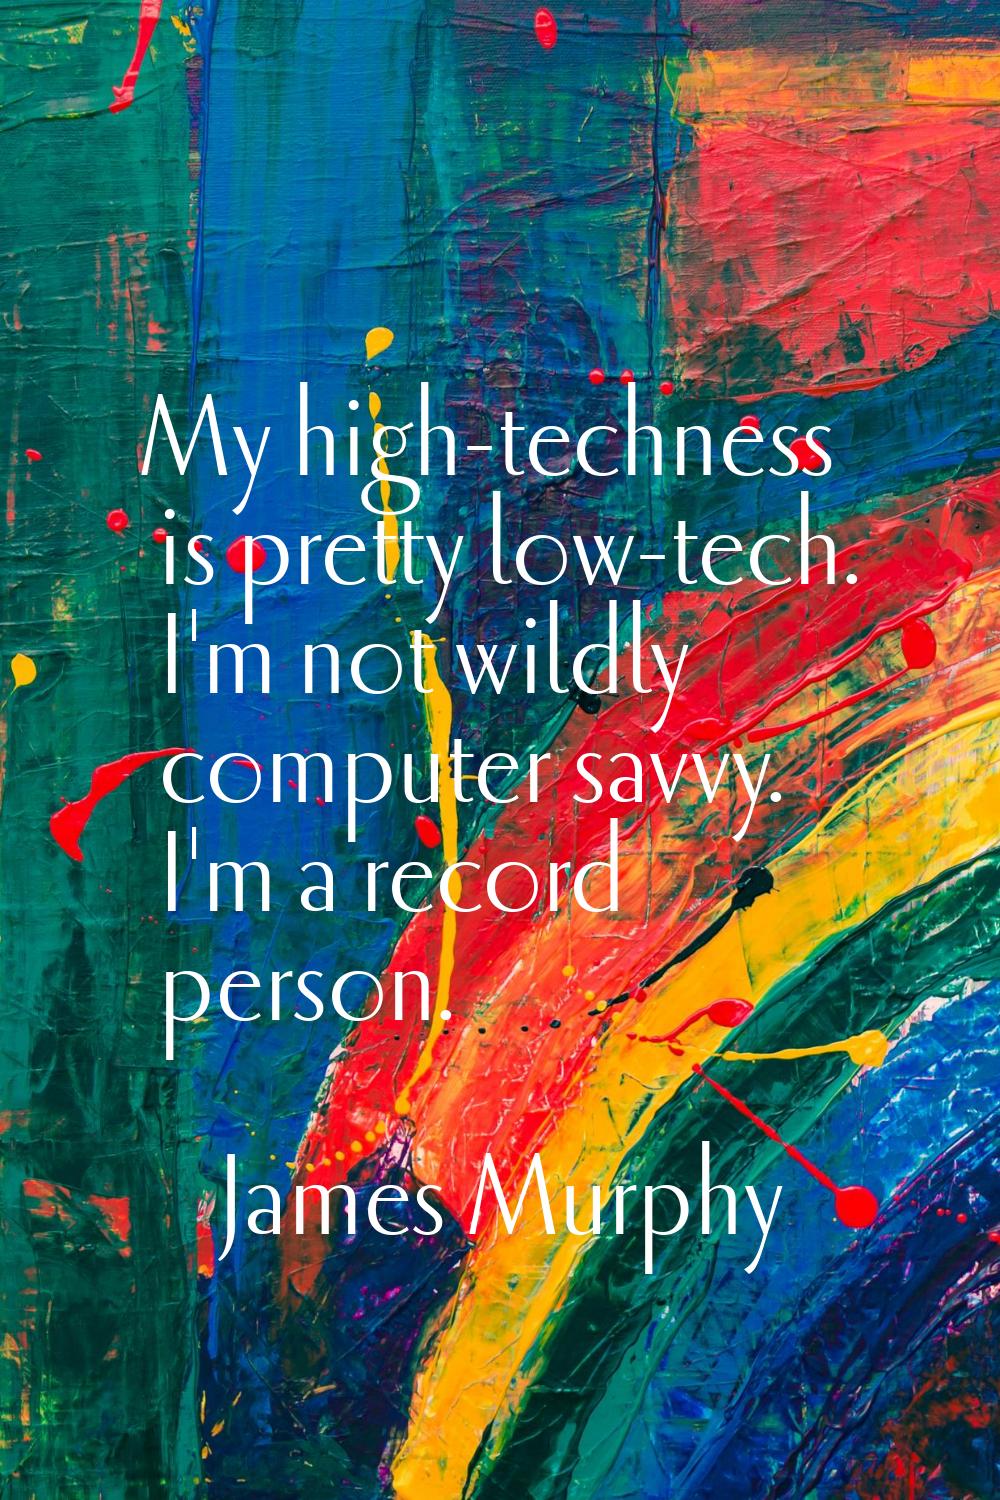 My high-techness is pretty low-tech. I'm not wildly computer savvy. I'm a record person.